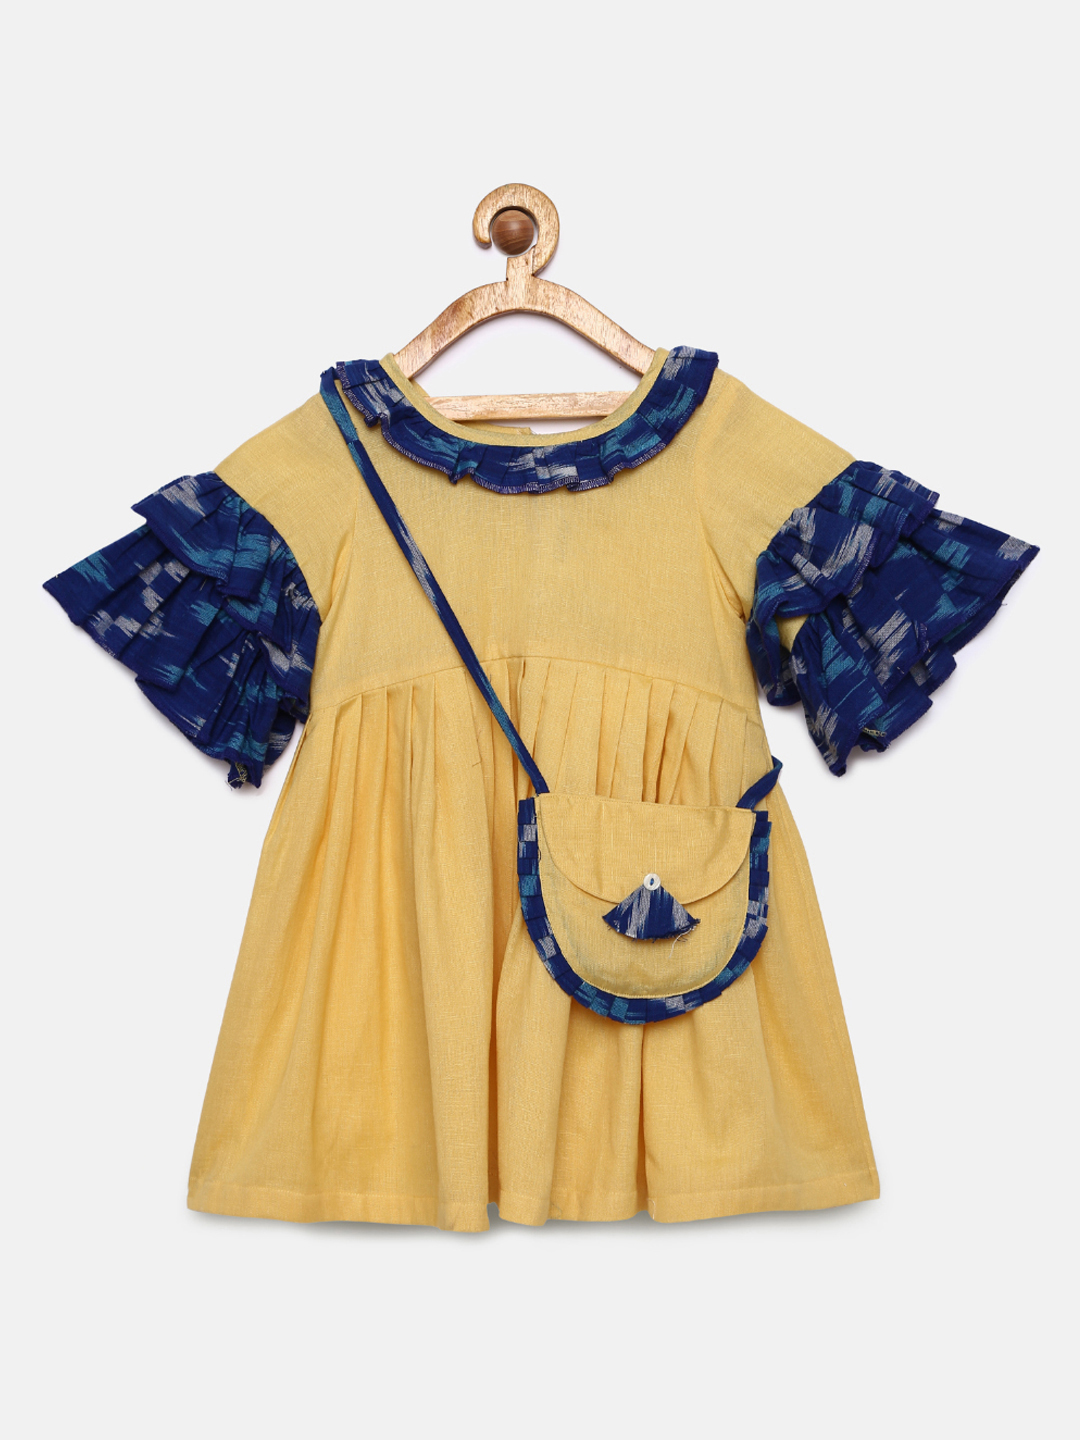 5 2 Ikat Asymmetric Dress with Sling Bag- Yellow and Blue